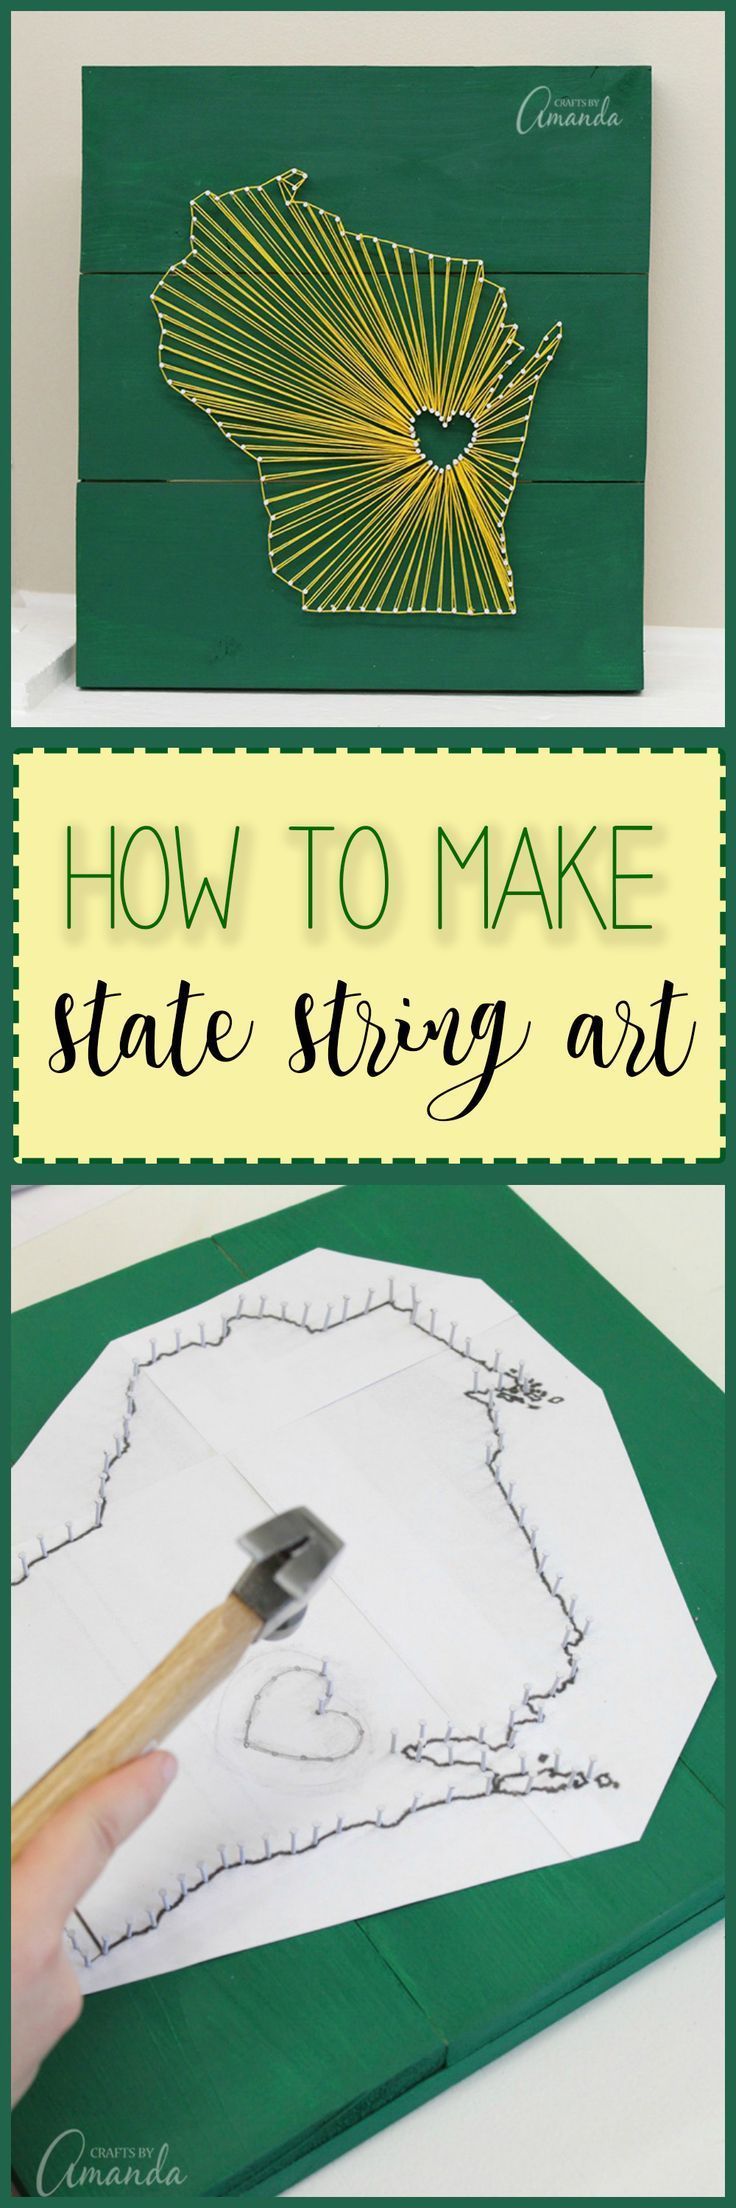 How to make state inspired string art using embroidery floss, small nails, craft glue, and a wooden board. Customize this wall art